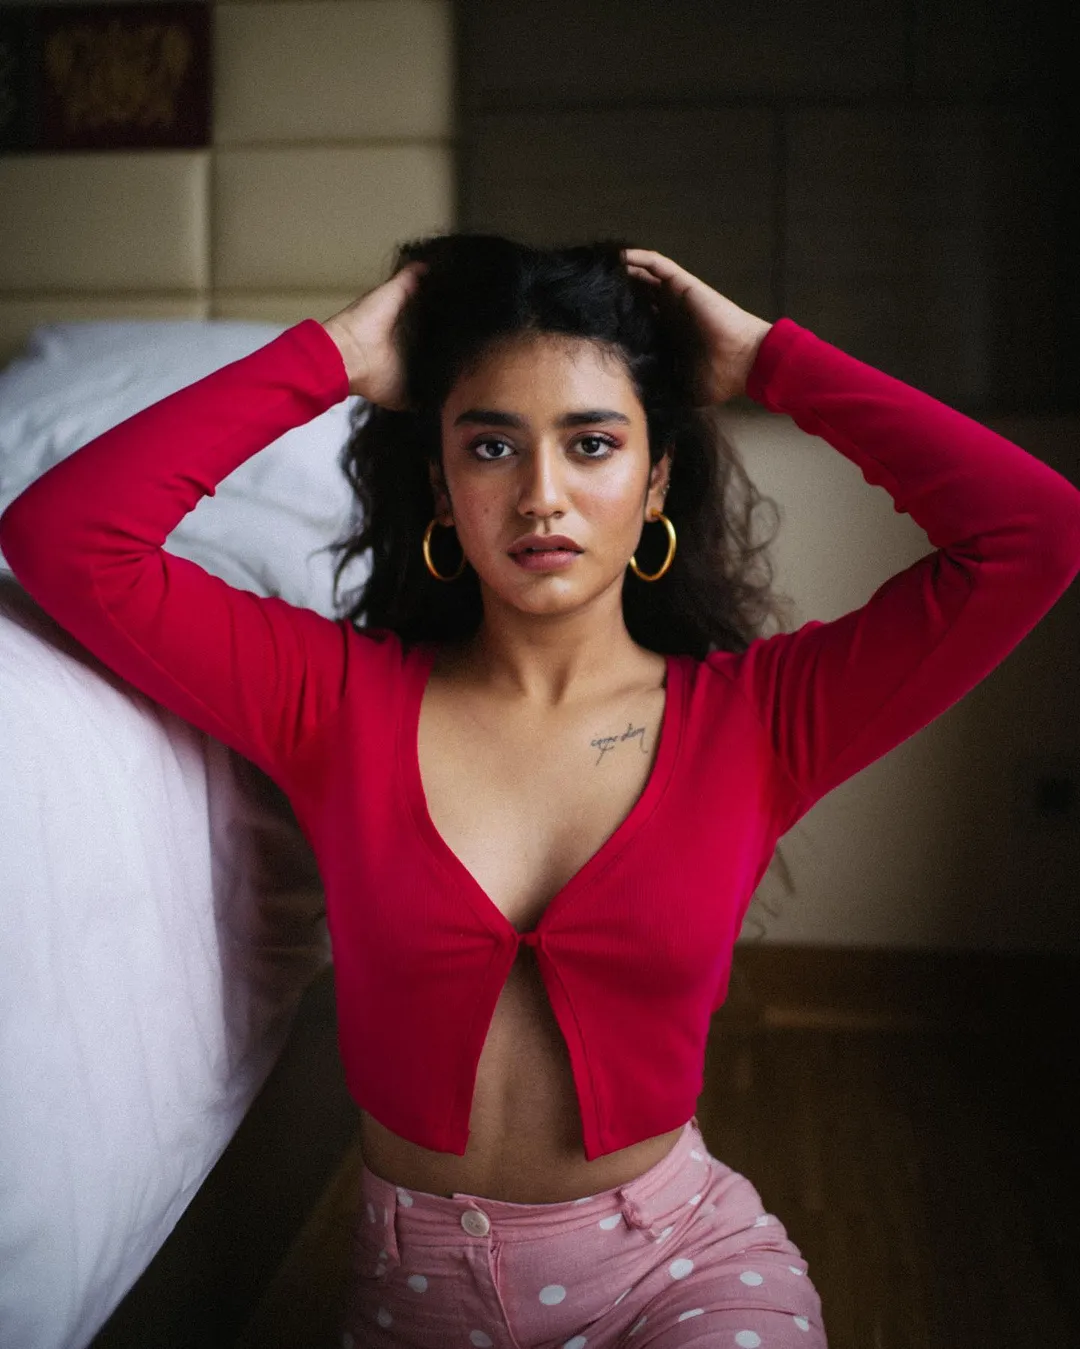 Priya Prakash Varrier has perfected the art of burning the internet, and with her most recent photo session